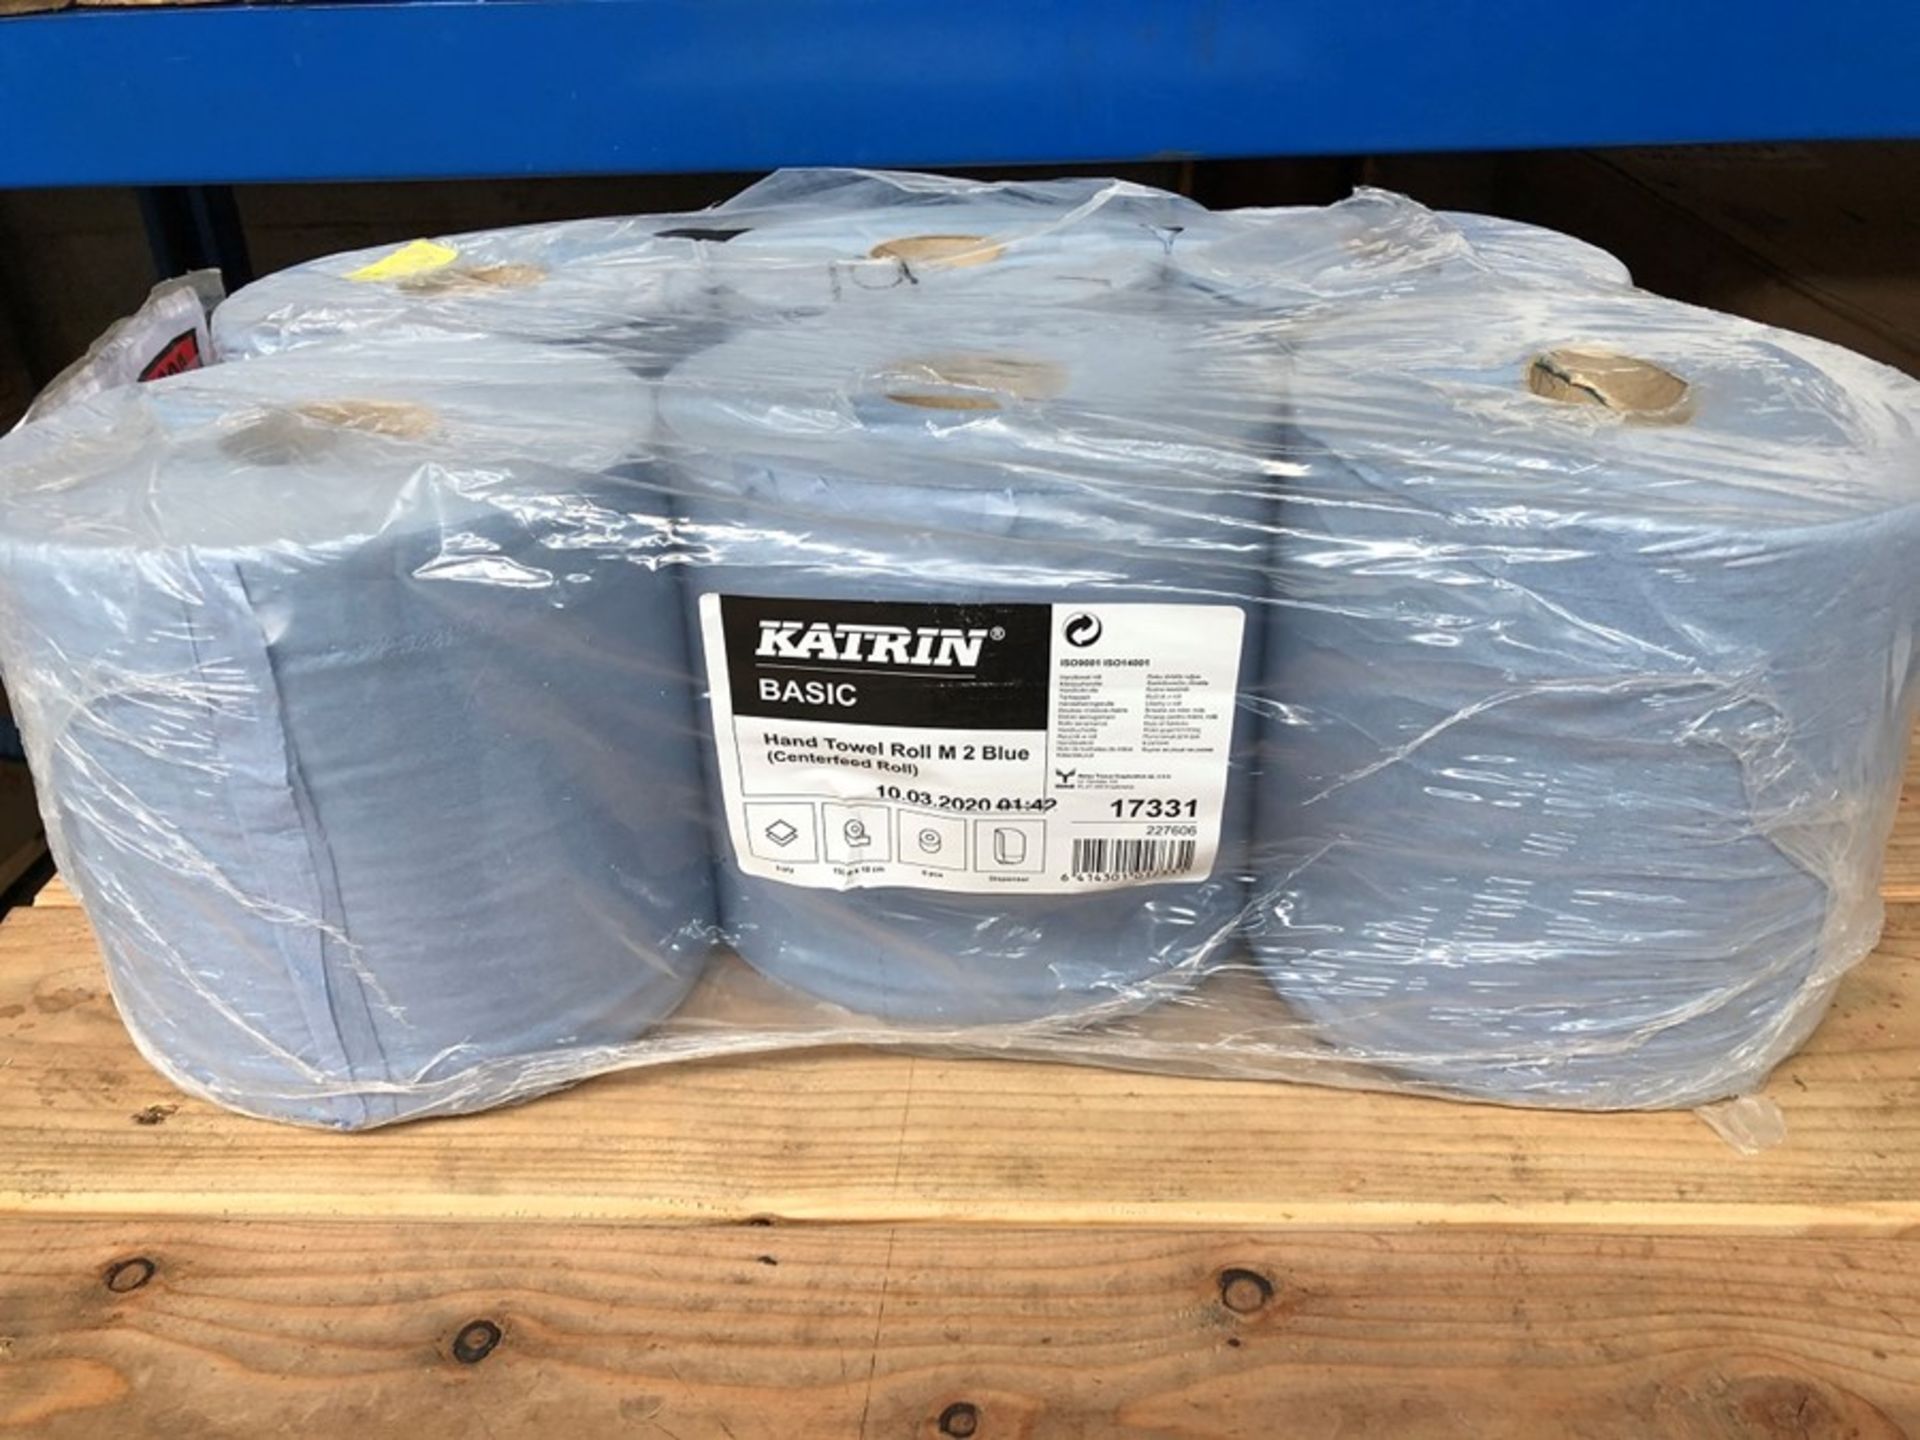 1 PACK OF 6 LARGE KATRIN PAPER HAND TOWEL ROLLS IN BLUE